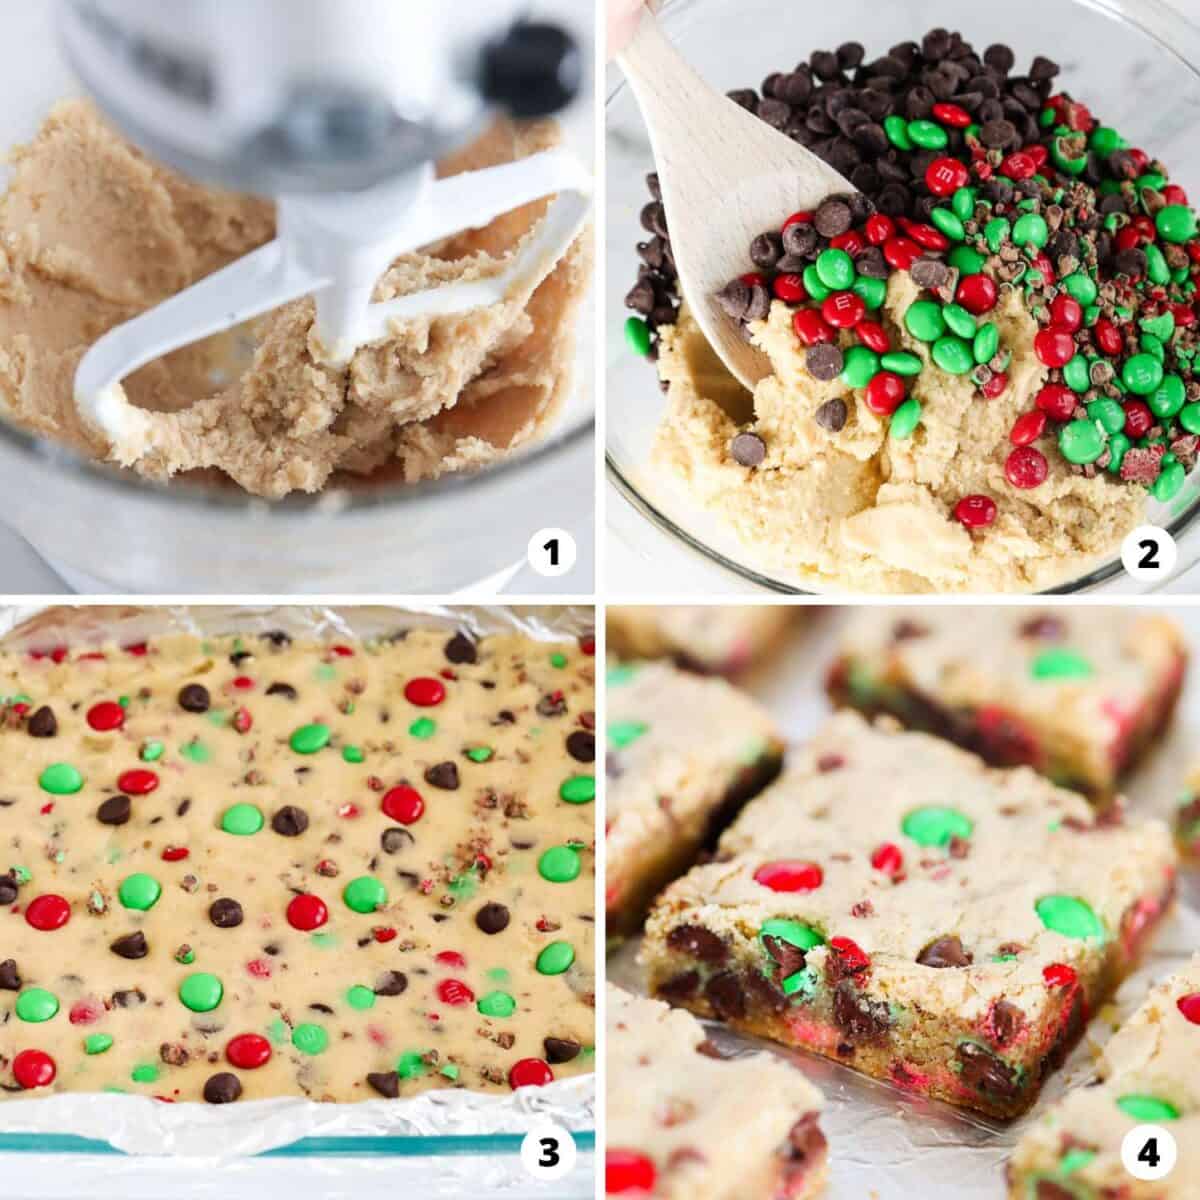 Showing how to make m&m cookie bars in a 4 step collage.